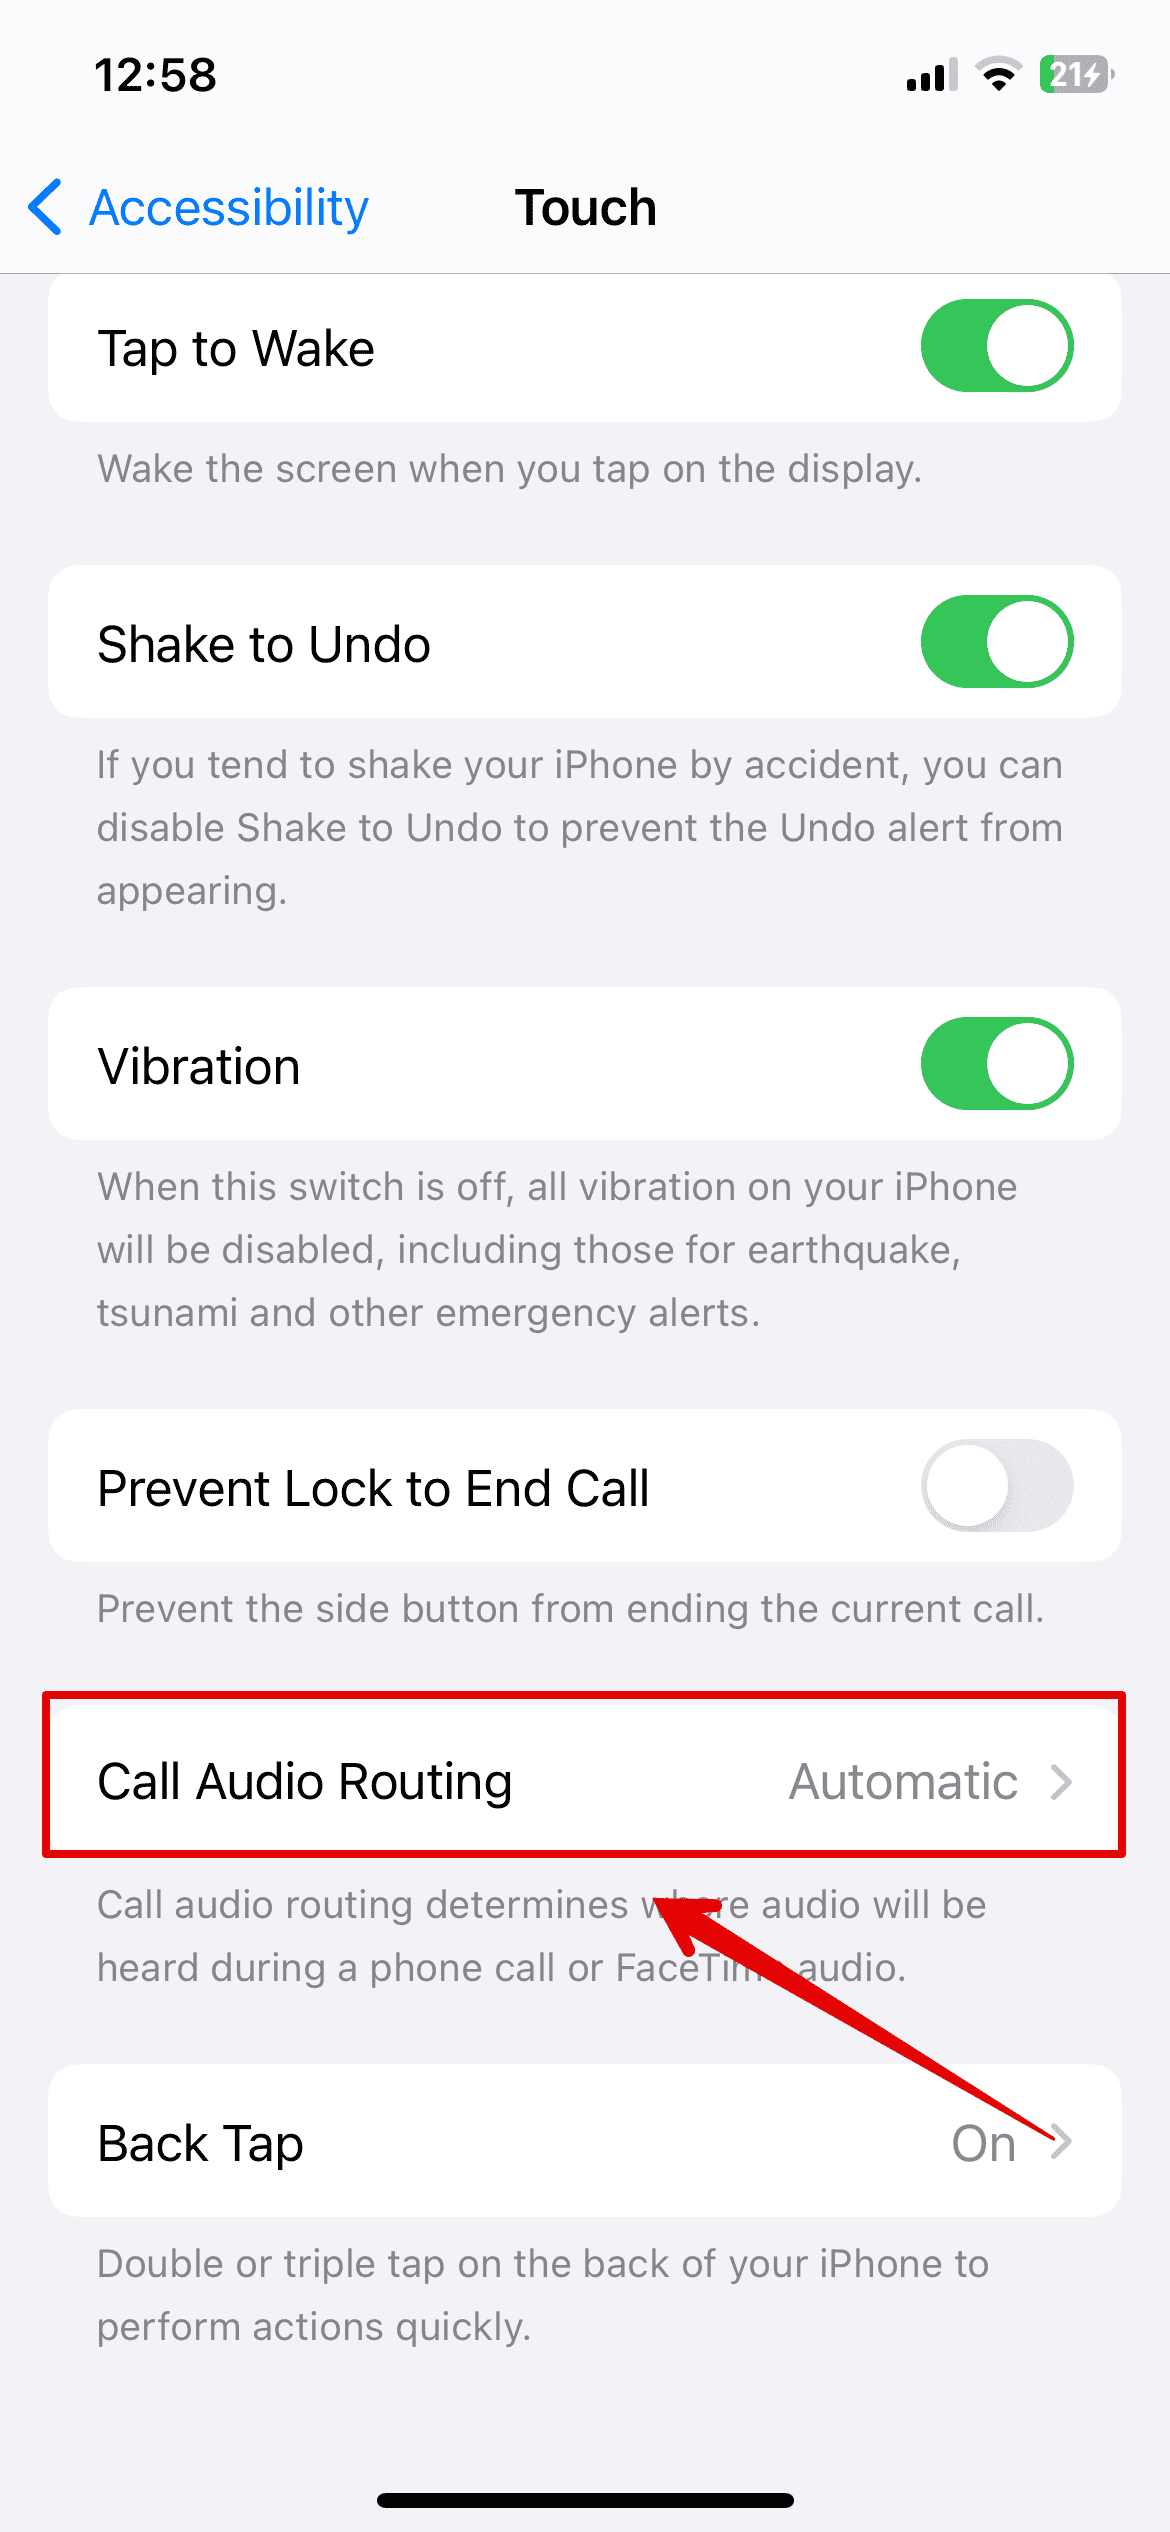 Go to Call Audio Routing